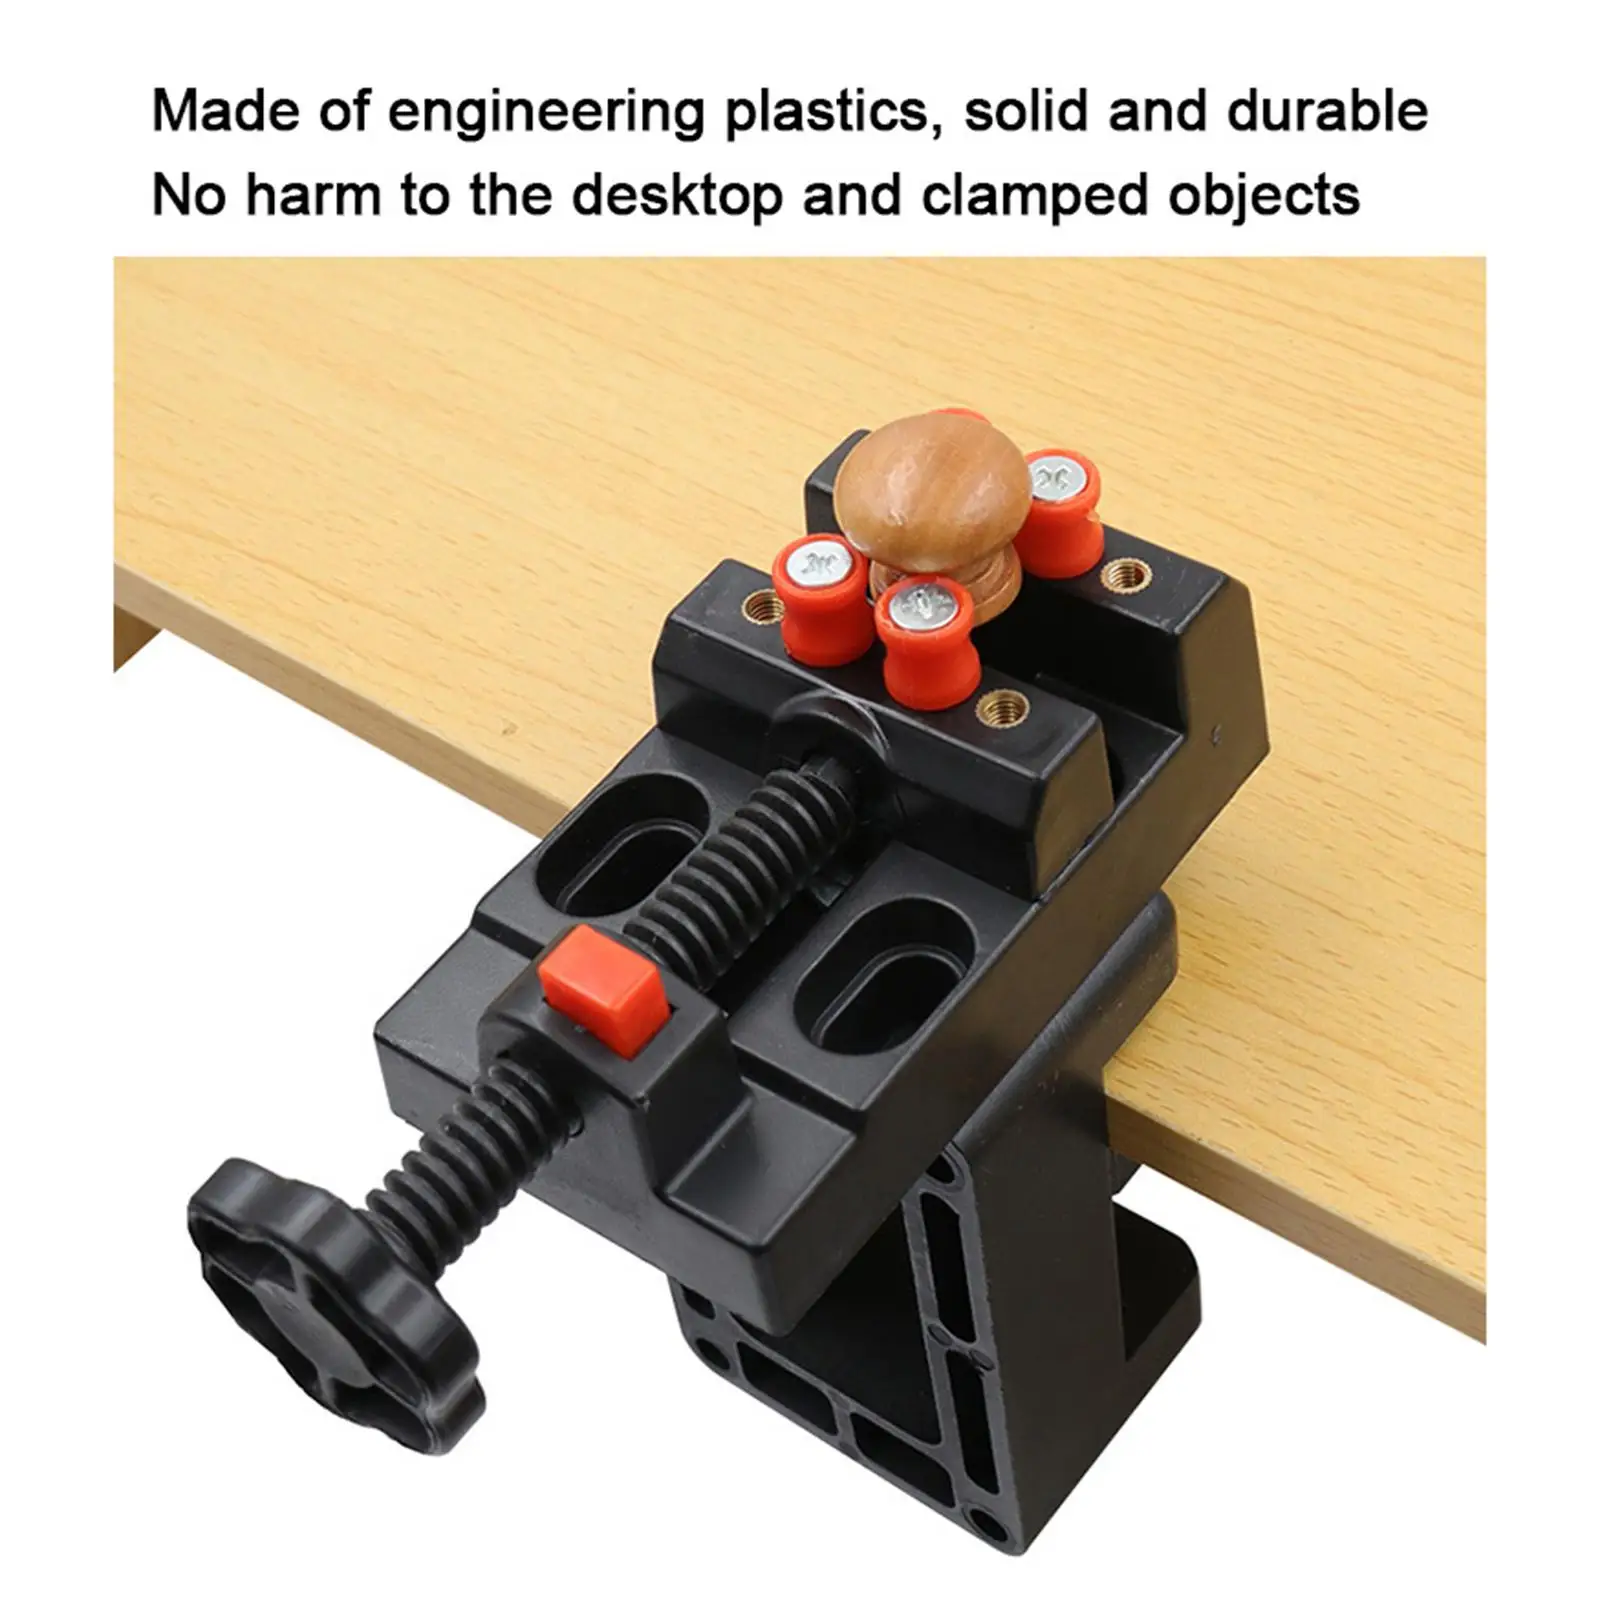 Heavy Duty Tabletop Clamp Vice for Metalworking Jewelry Making Building Work Drilling